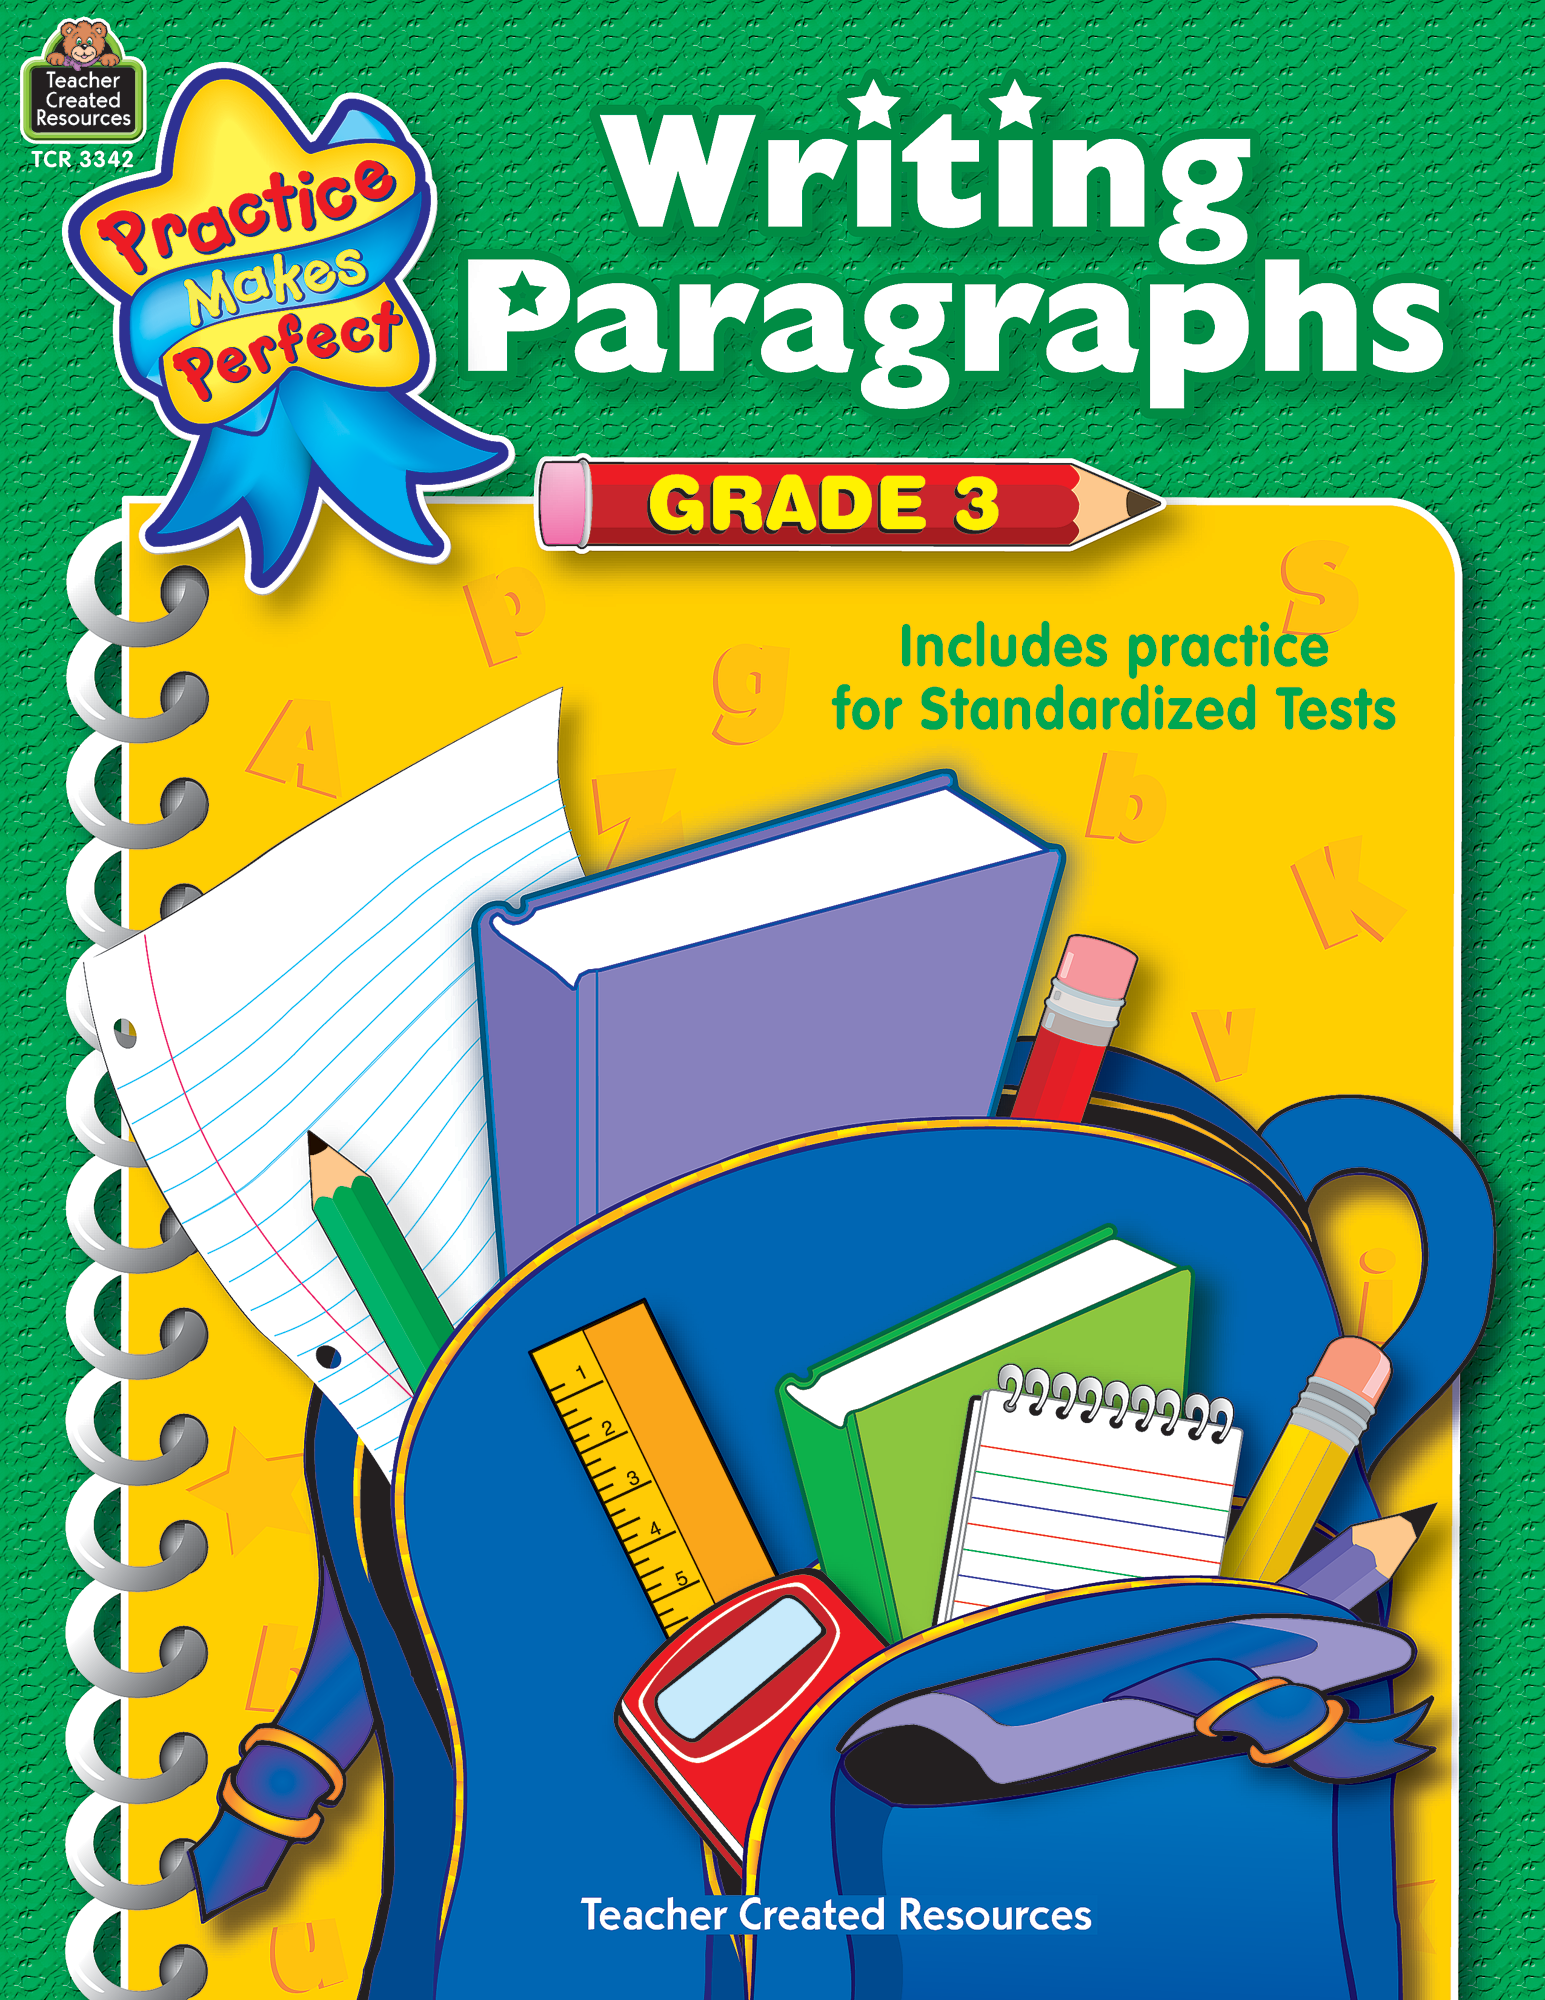 Writing Paragraphs Grade 3 - TCR3342 | Teacher Created Resources